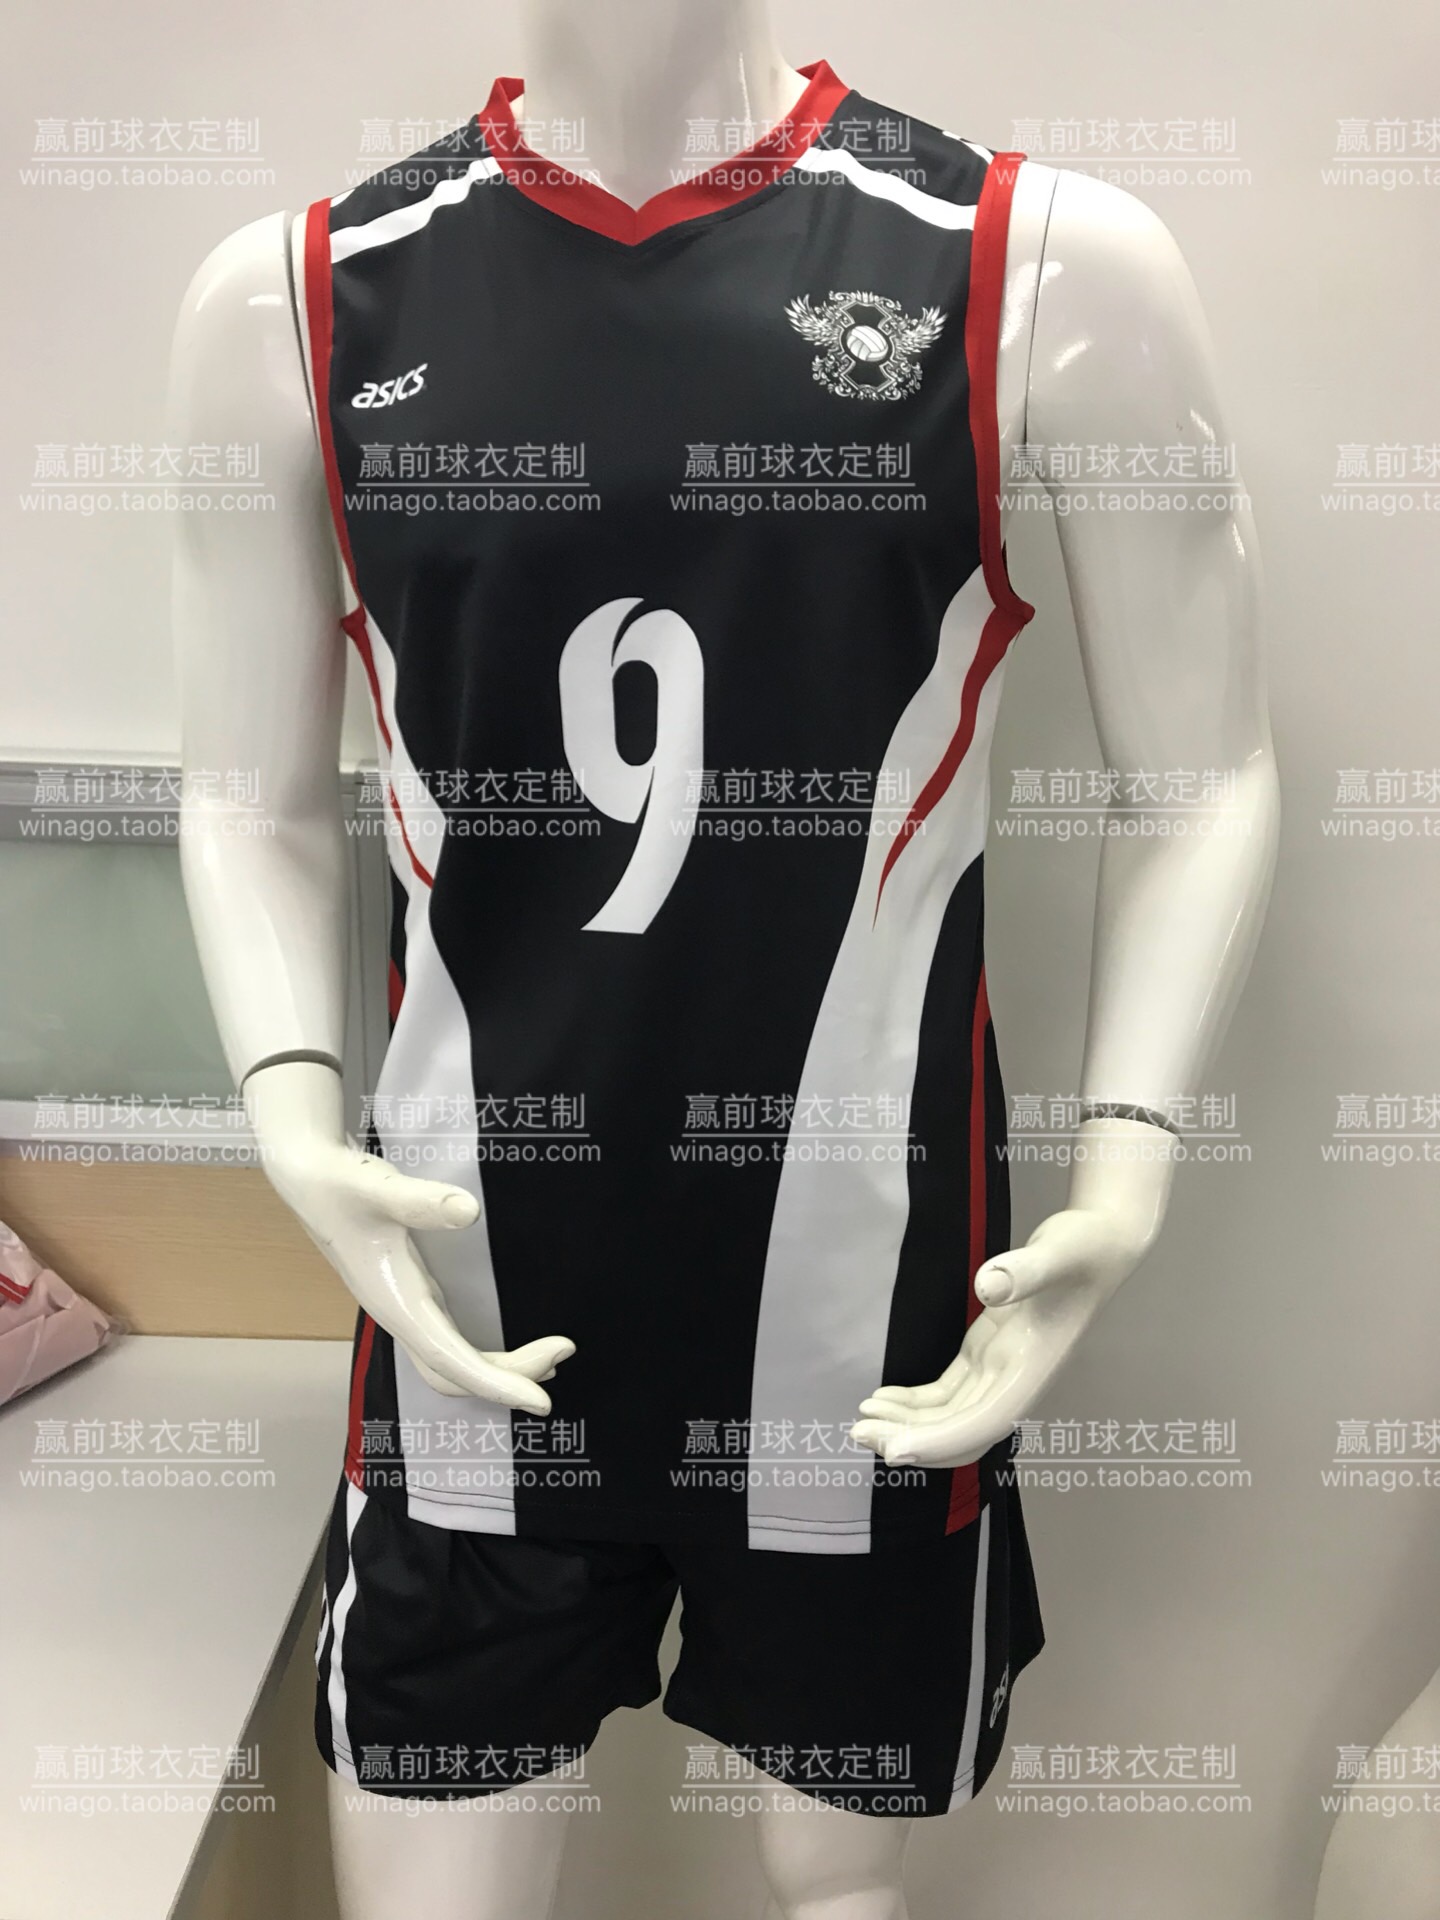 Customized Gas Volleyball Suit Men And Women Competition Training Suit Design Printing Size Moisture Wicking Sleeveless,Liquidation Designer Clothing